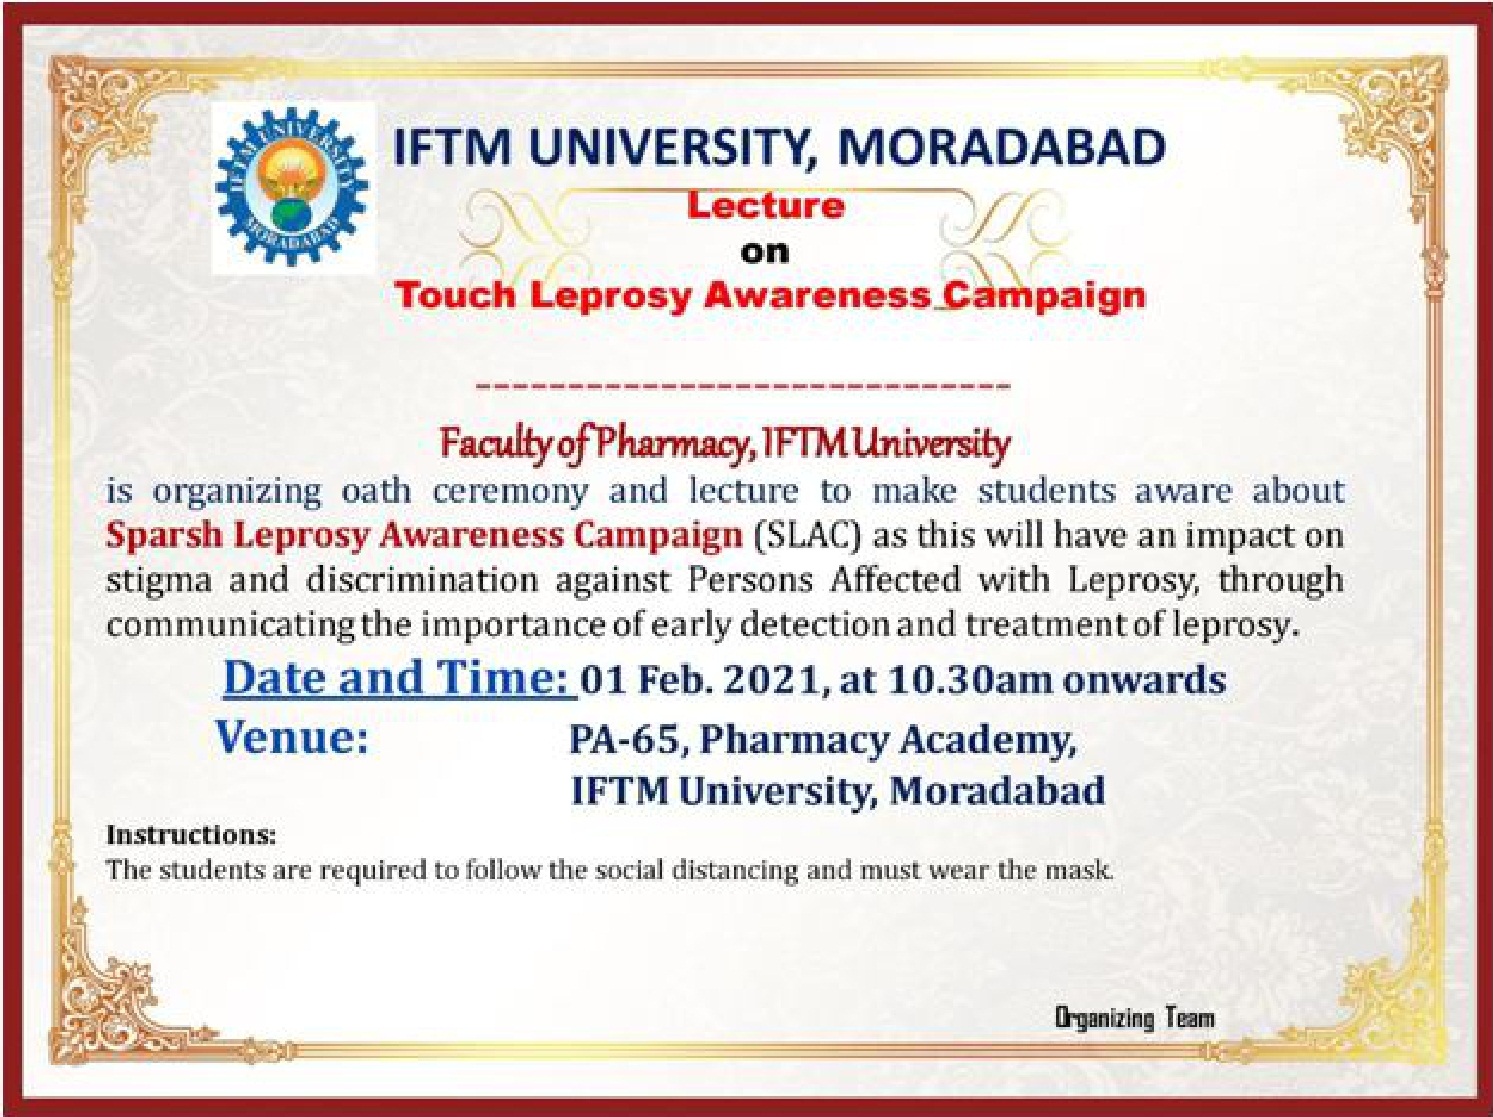 Guest Lecture on Touch Leprosy Awareness Campaign